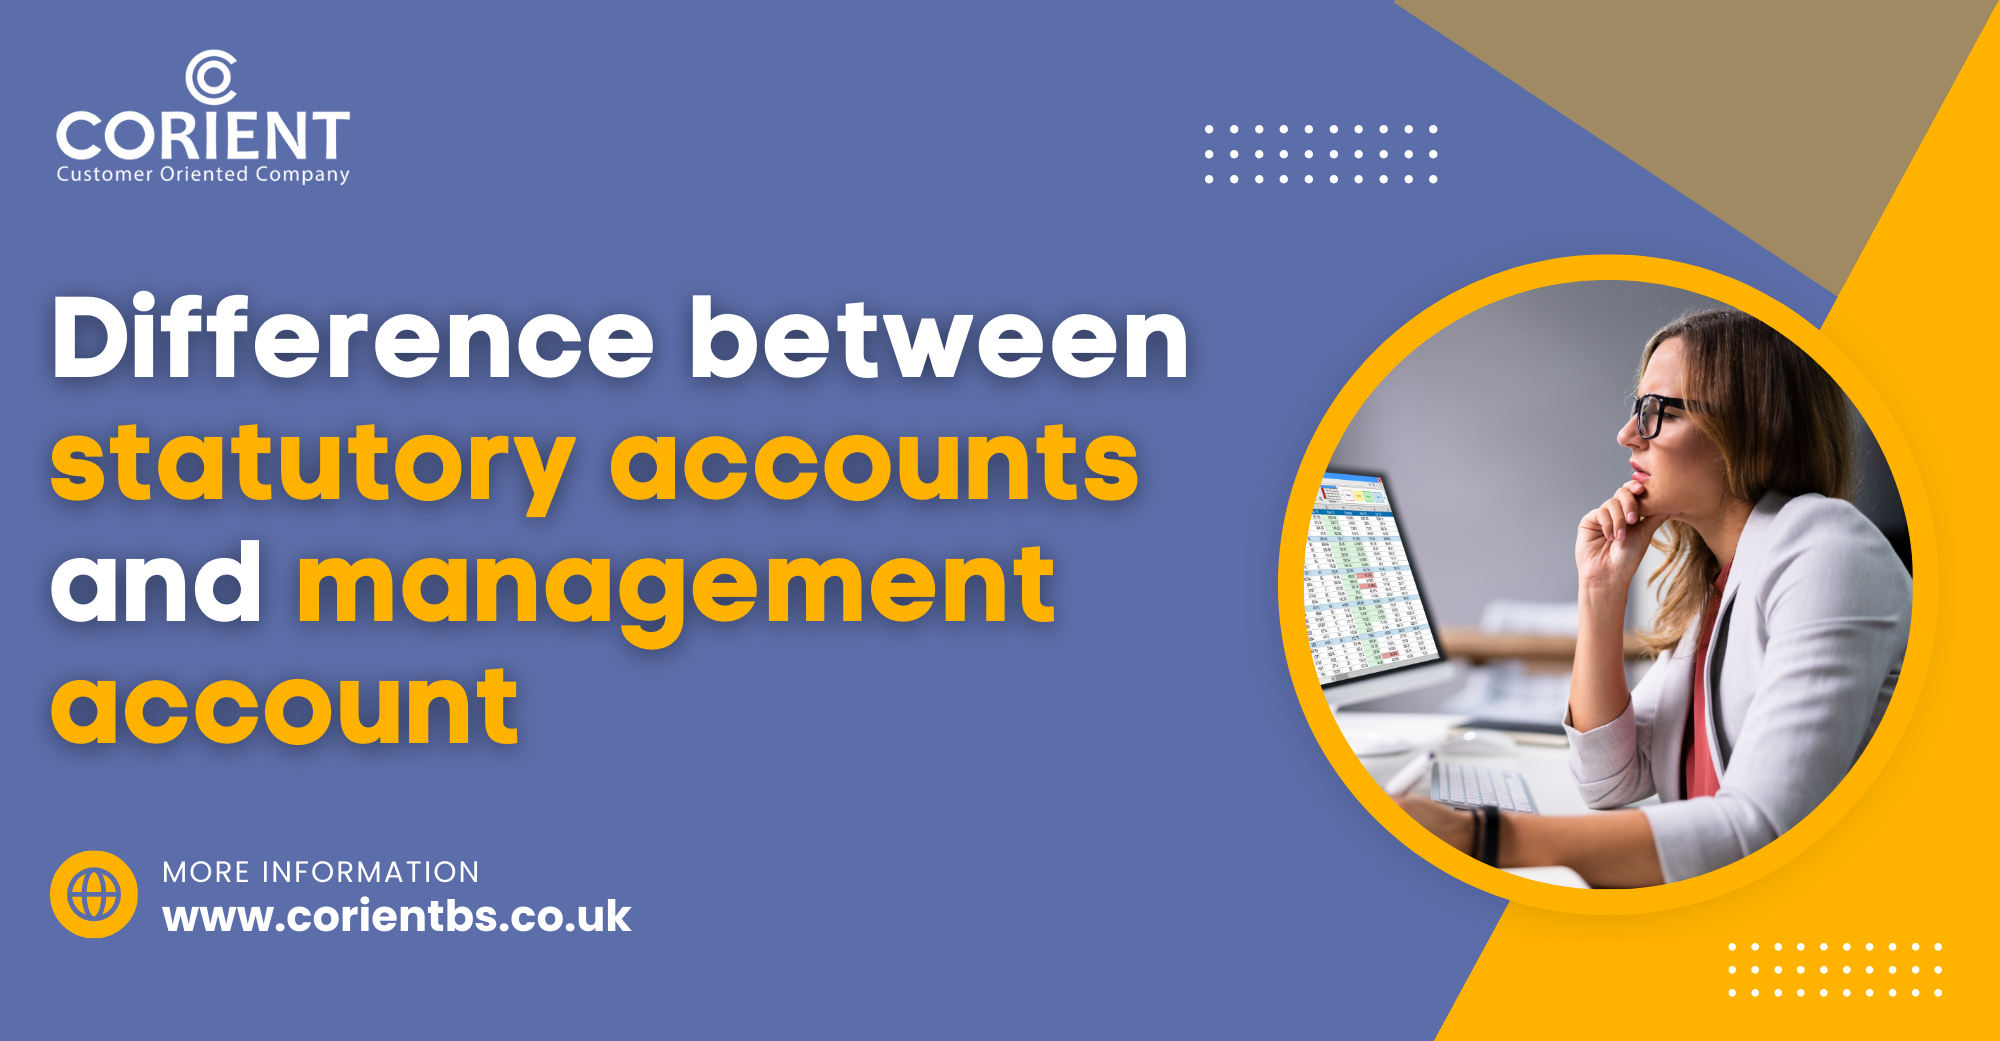 Difference Between Statutory Accounts and Management Accounts